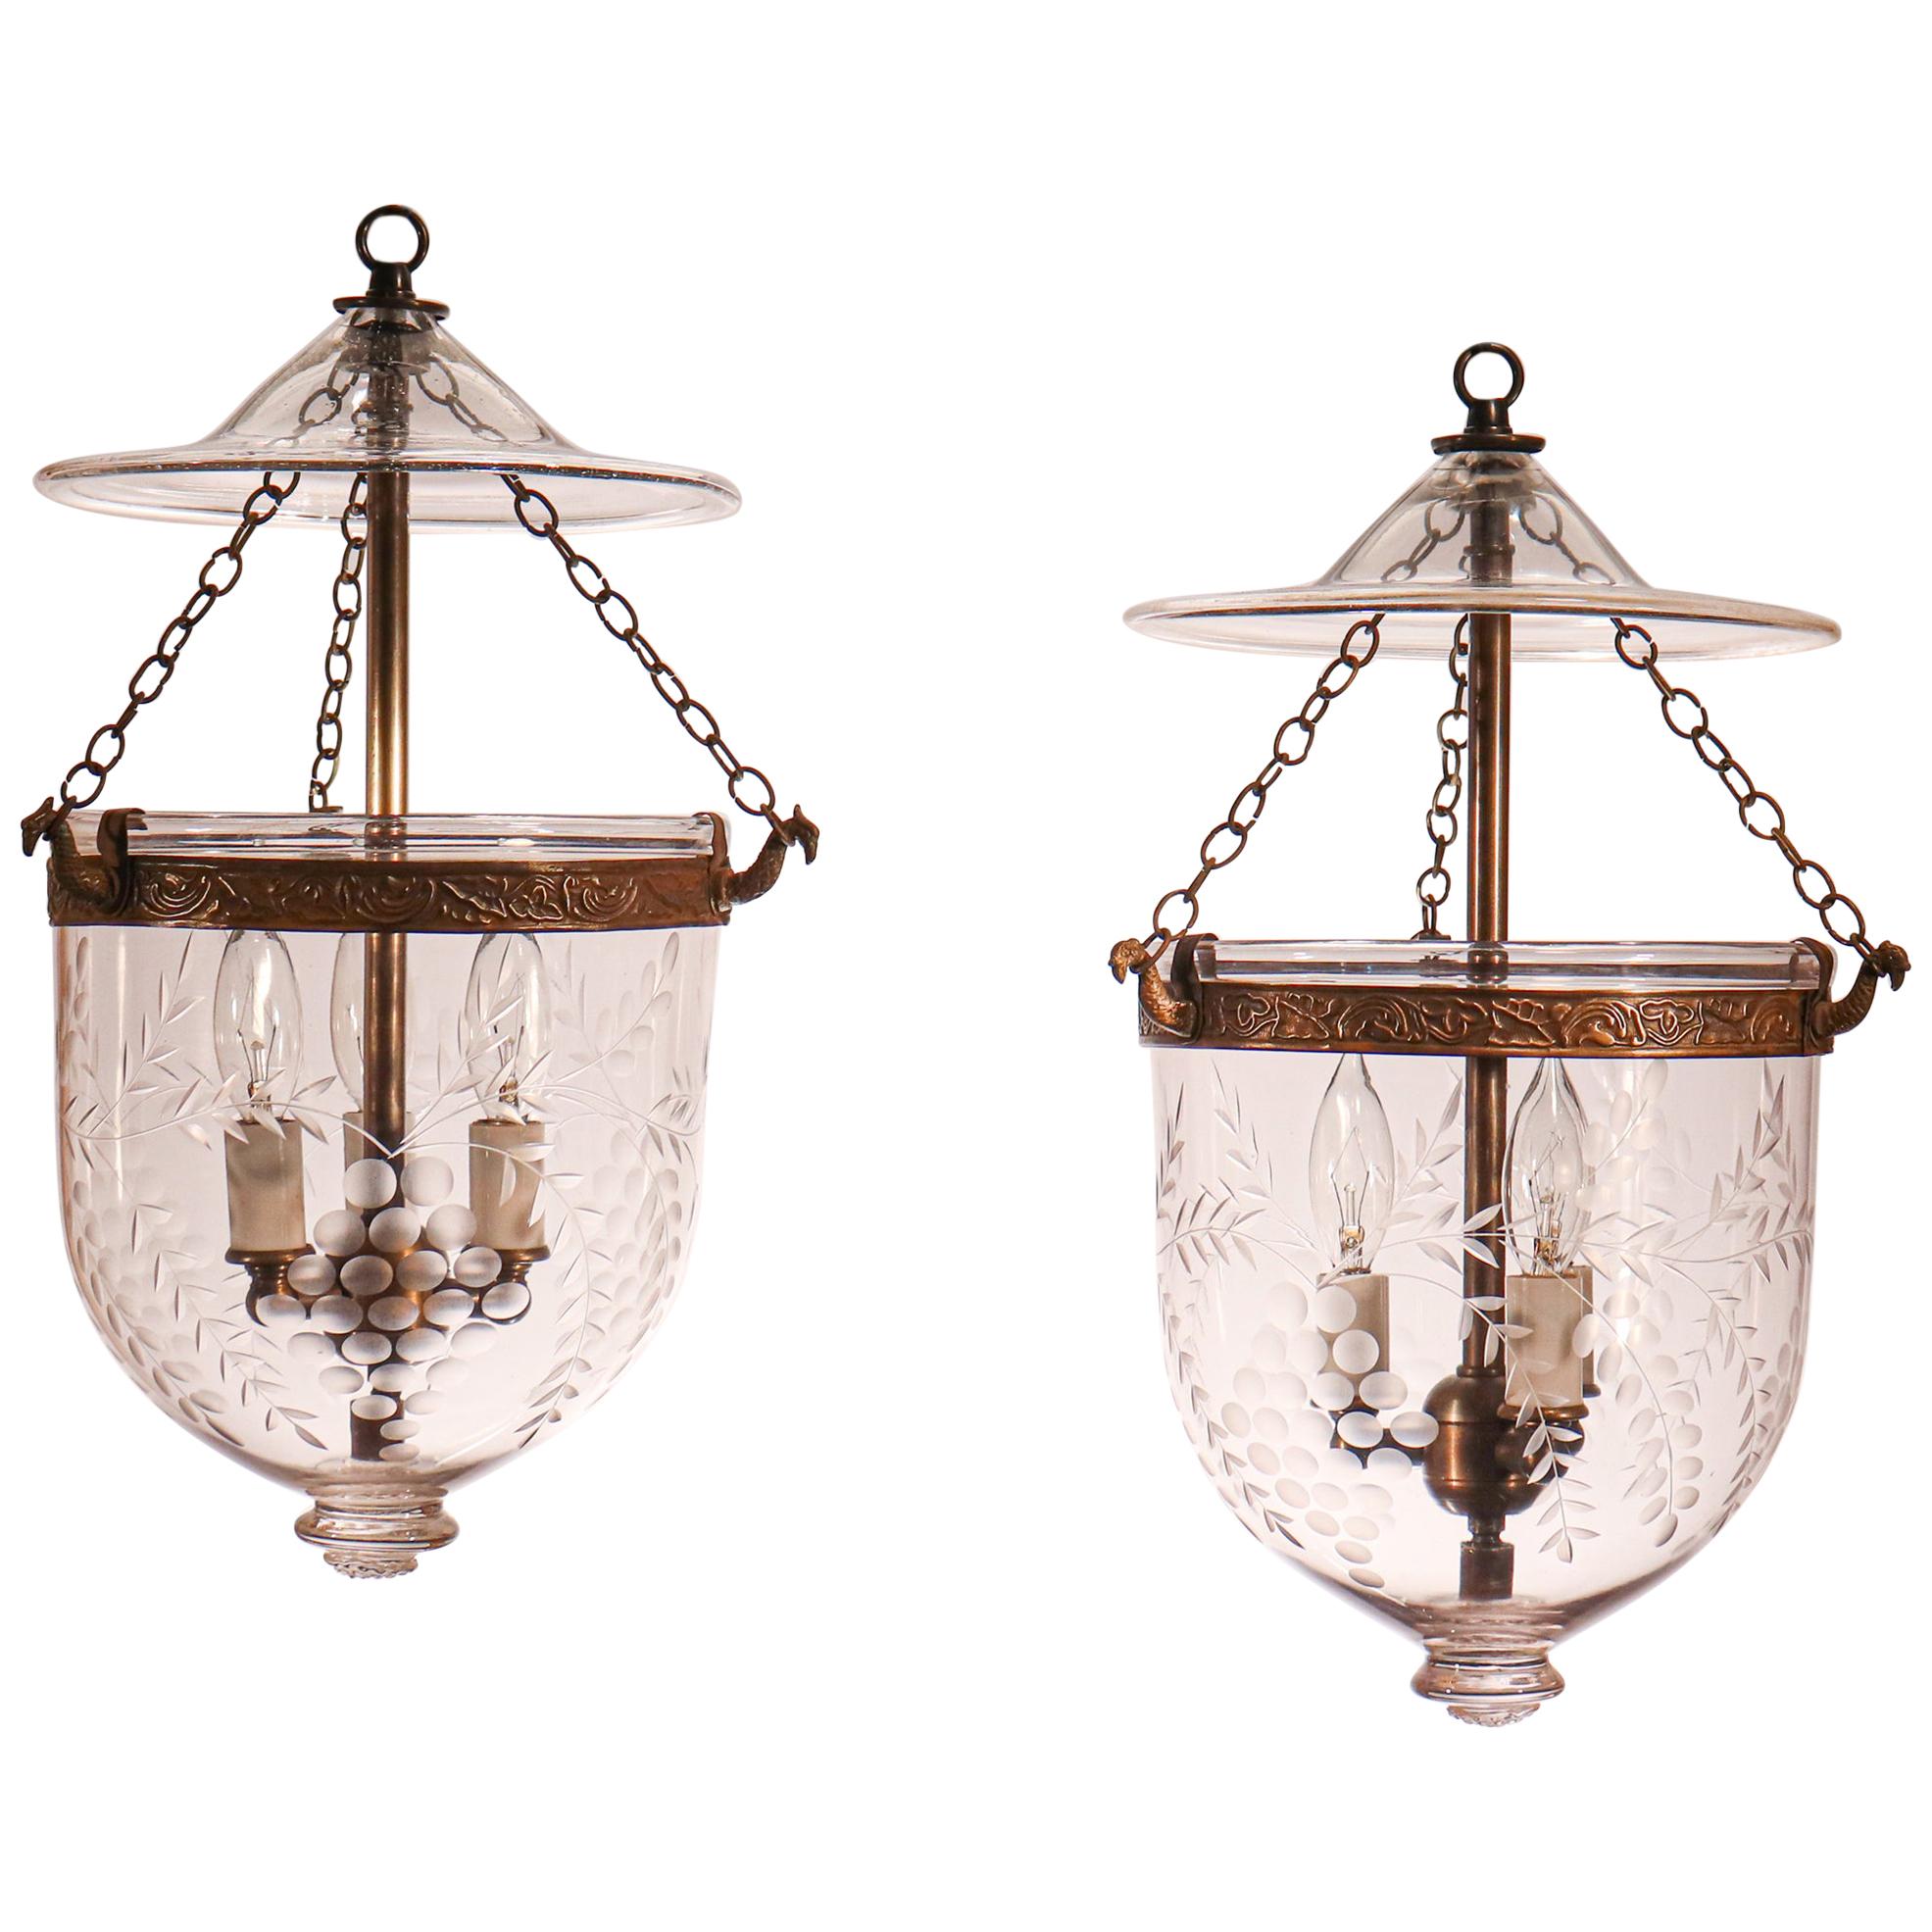 Pair of Petite Antique Bell Jar Lanterns with Grape Etching